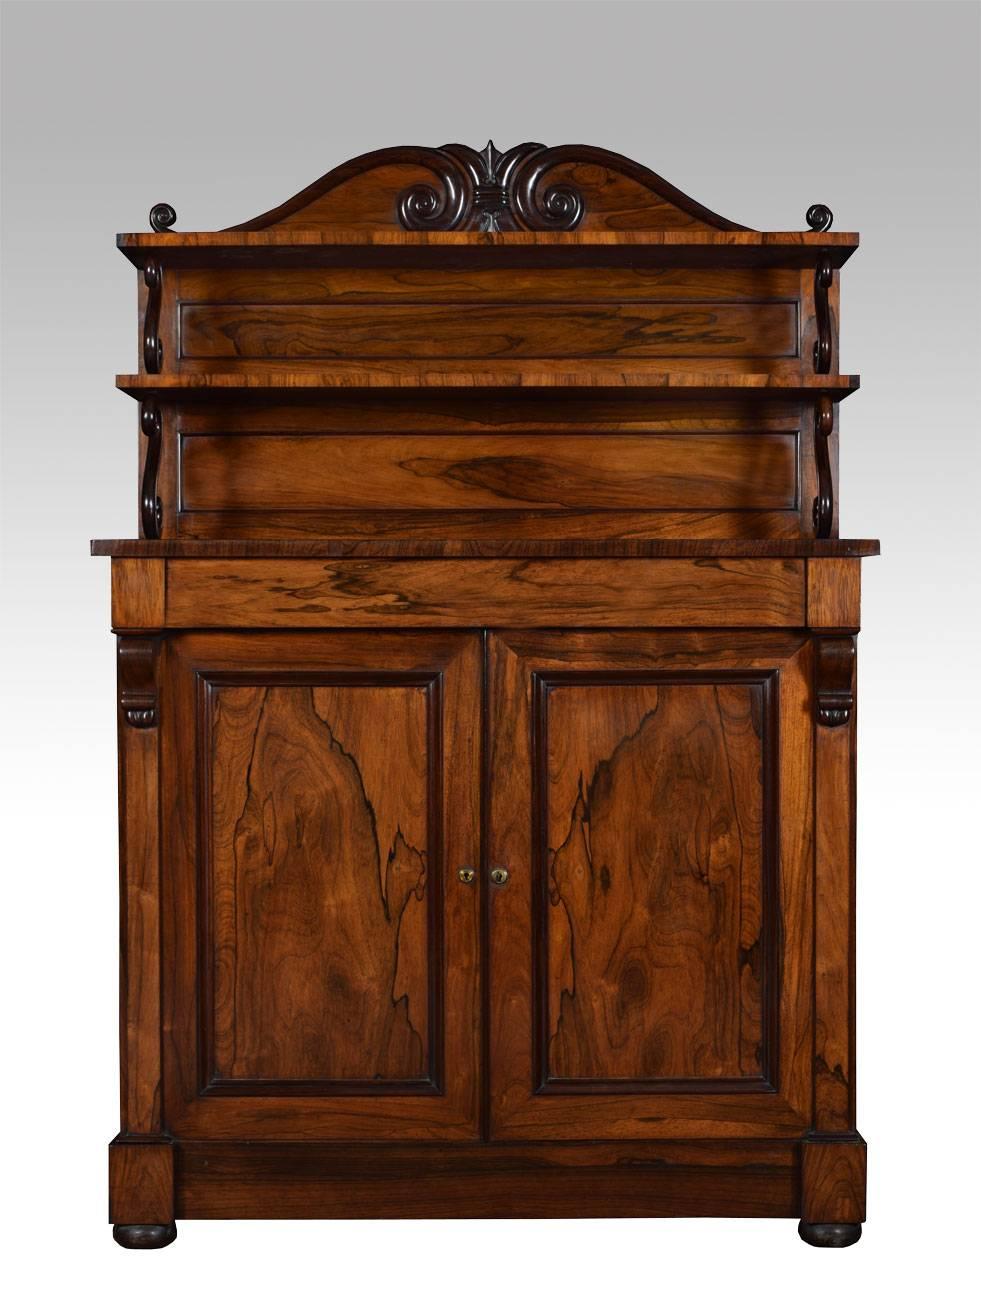 Regency chiffonier, the raised panelled gallery back with S scroll brackets. The base section with single draw above two rosewood panelled cabinet doors enclosing two adjustable shelves, on plinth base terminating in bun feet

Dimensions:

Height 66